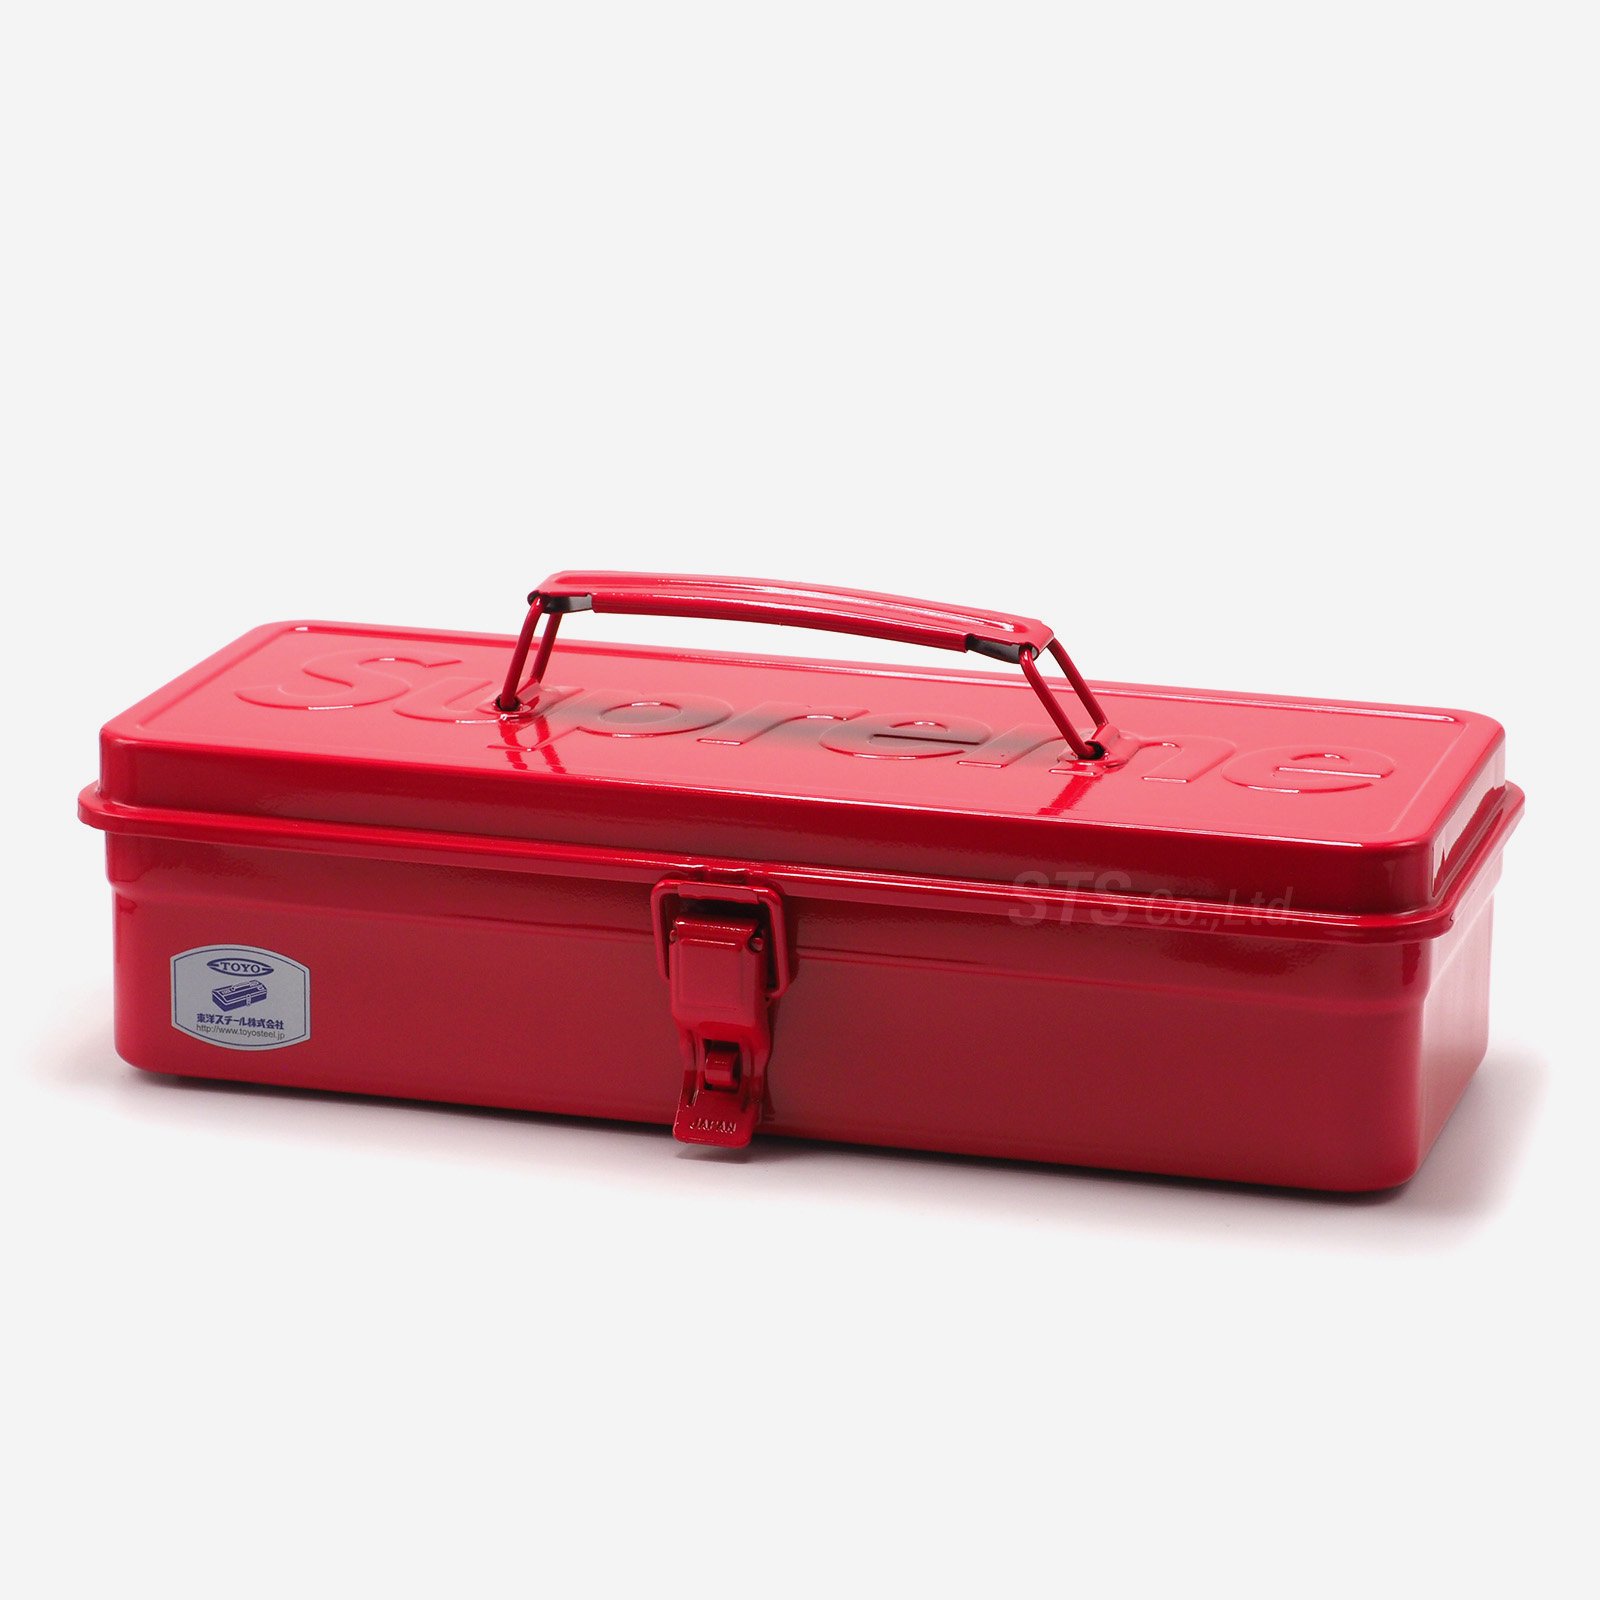 Supreme®/TOYO Steel T-320 Toolbox レッド 東洋